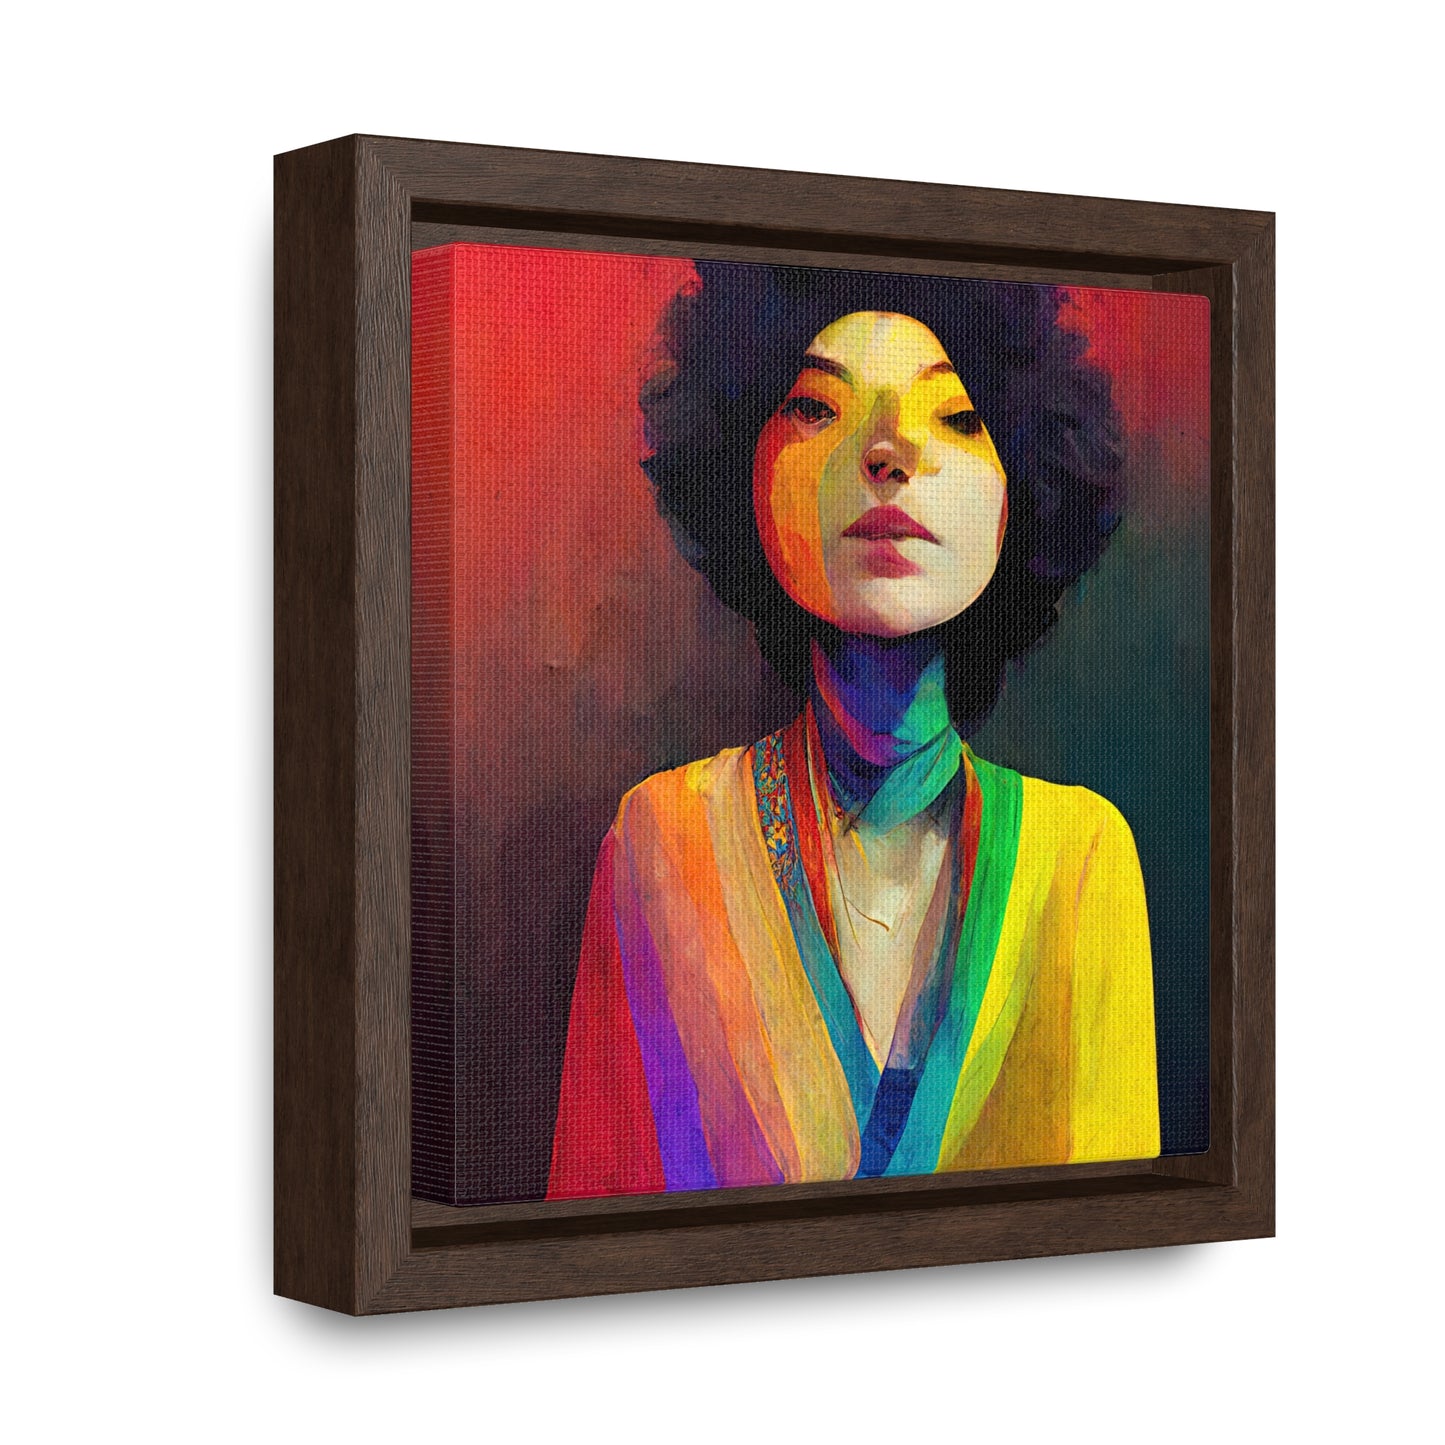 Lady's faces 23, Valentinii, Gallery Canvas Wraps, Square Frame